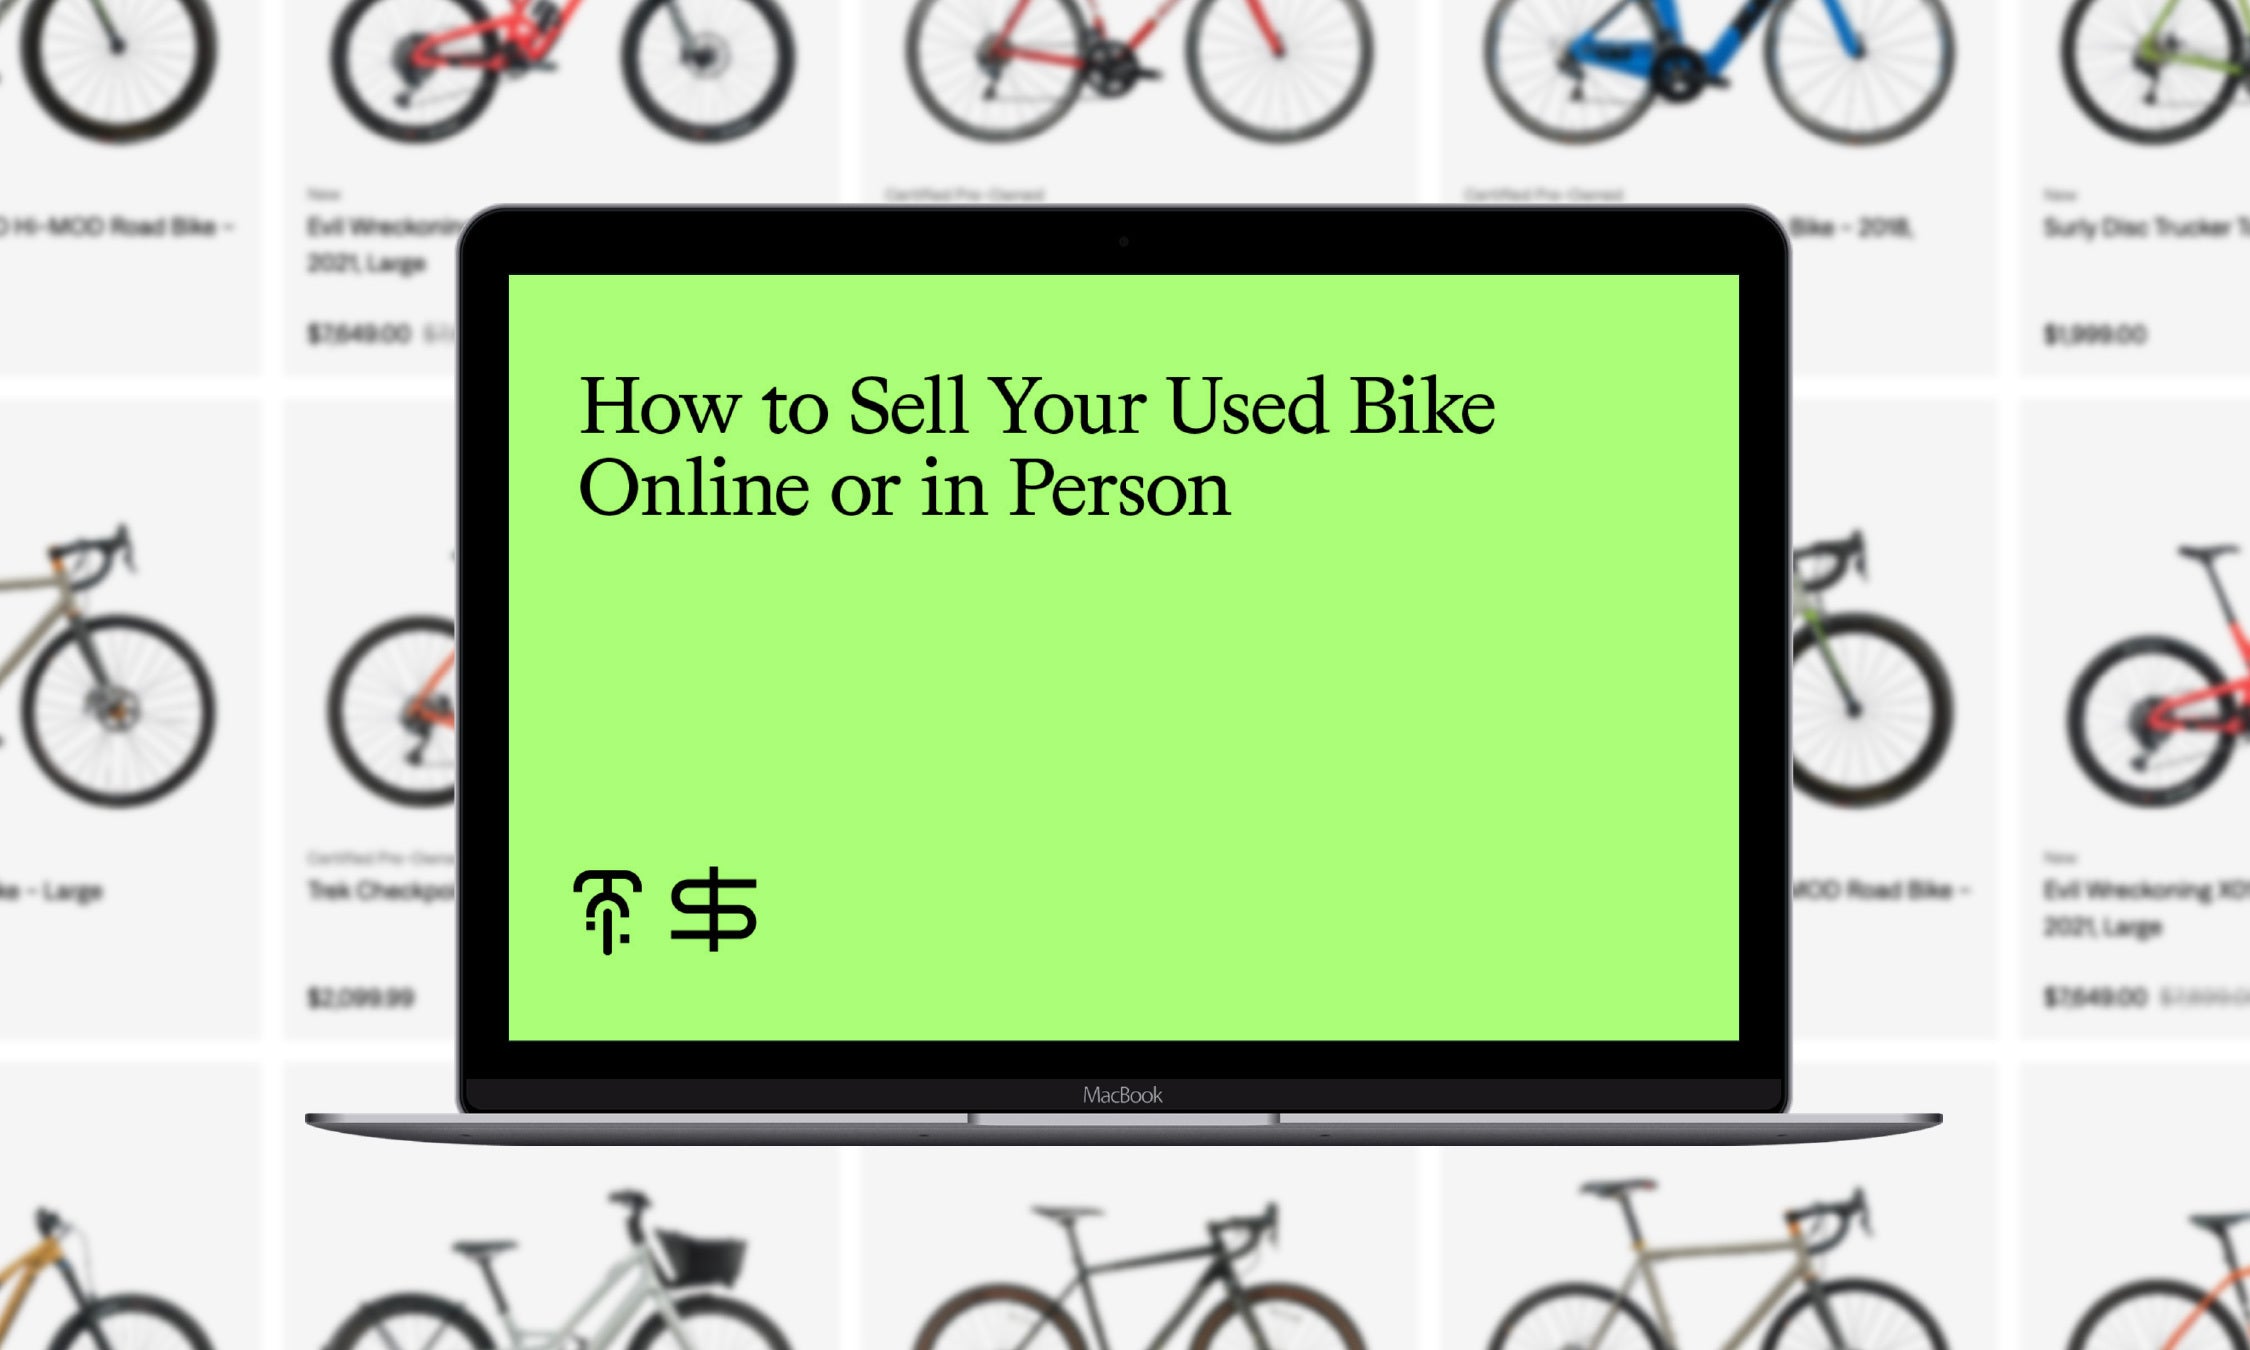 How to Sell Your Used Bike Online or in Person TPC